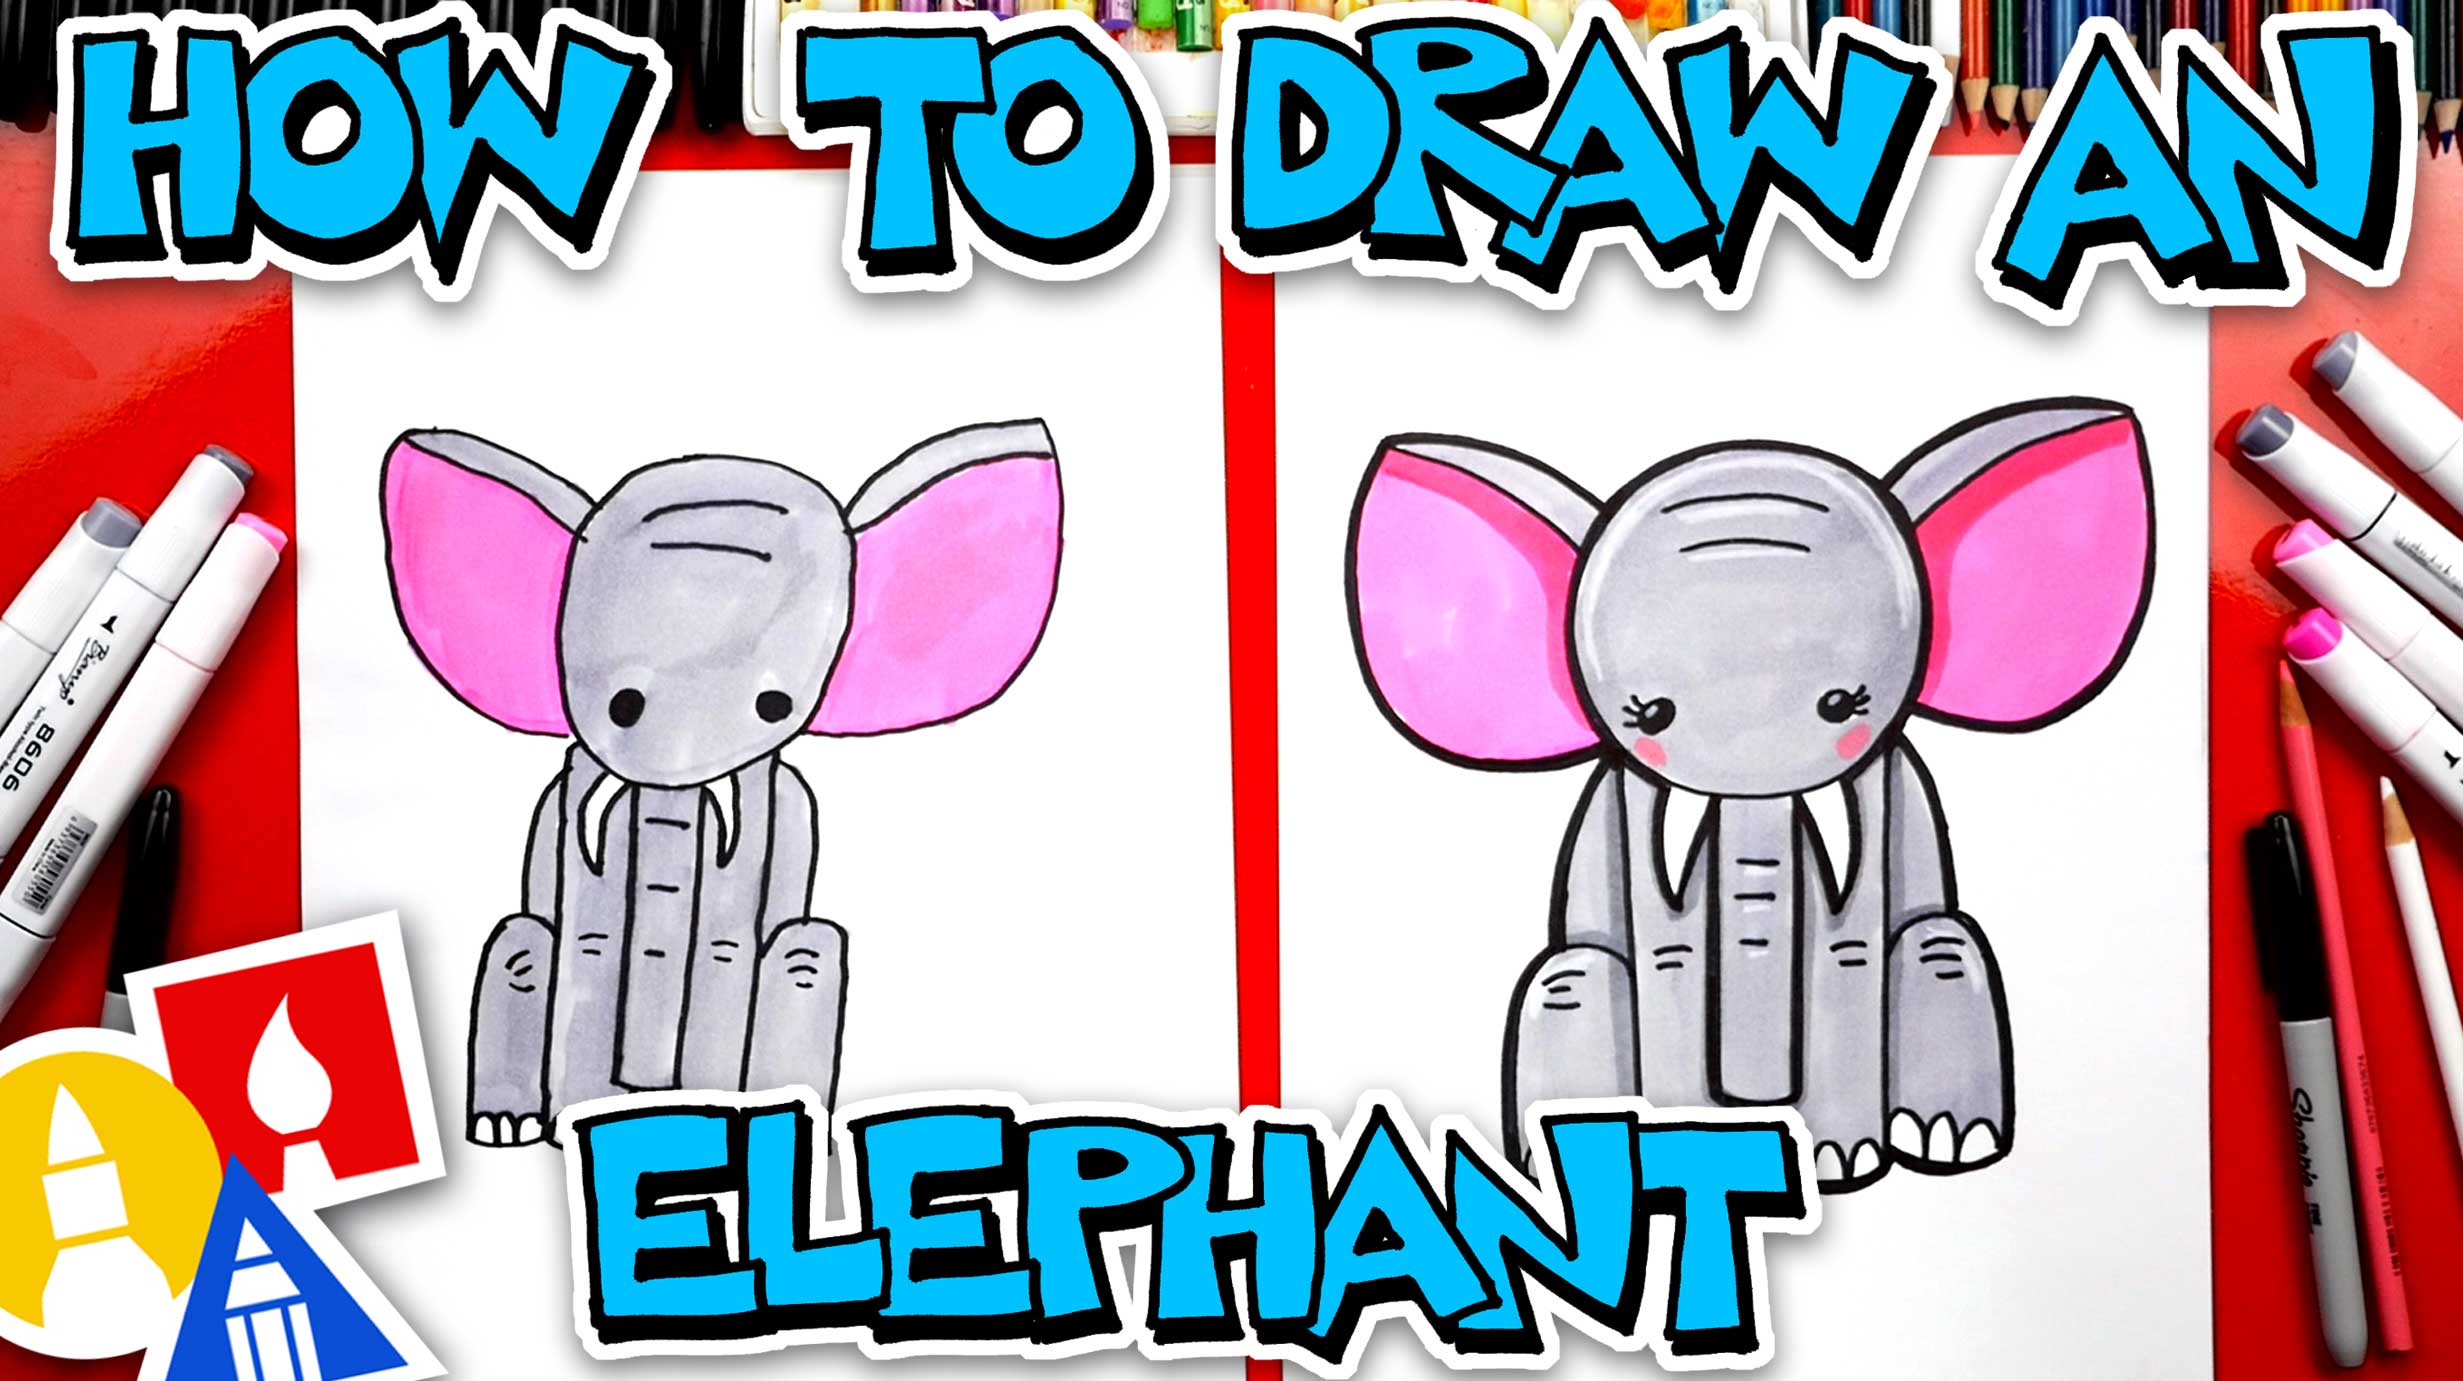 Learn How to Draw a Realistic Elephant in 7 Easy Steps